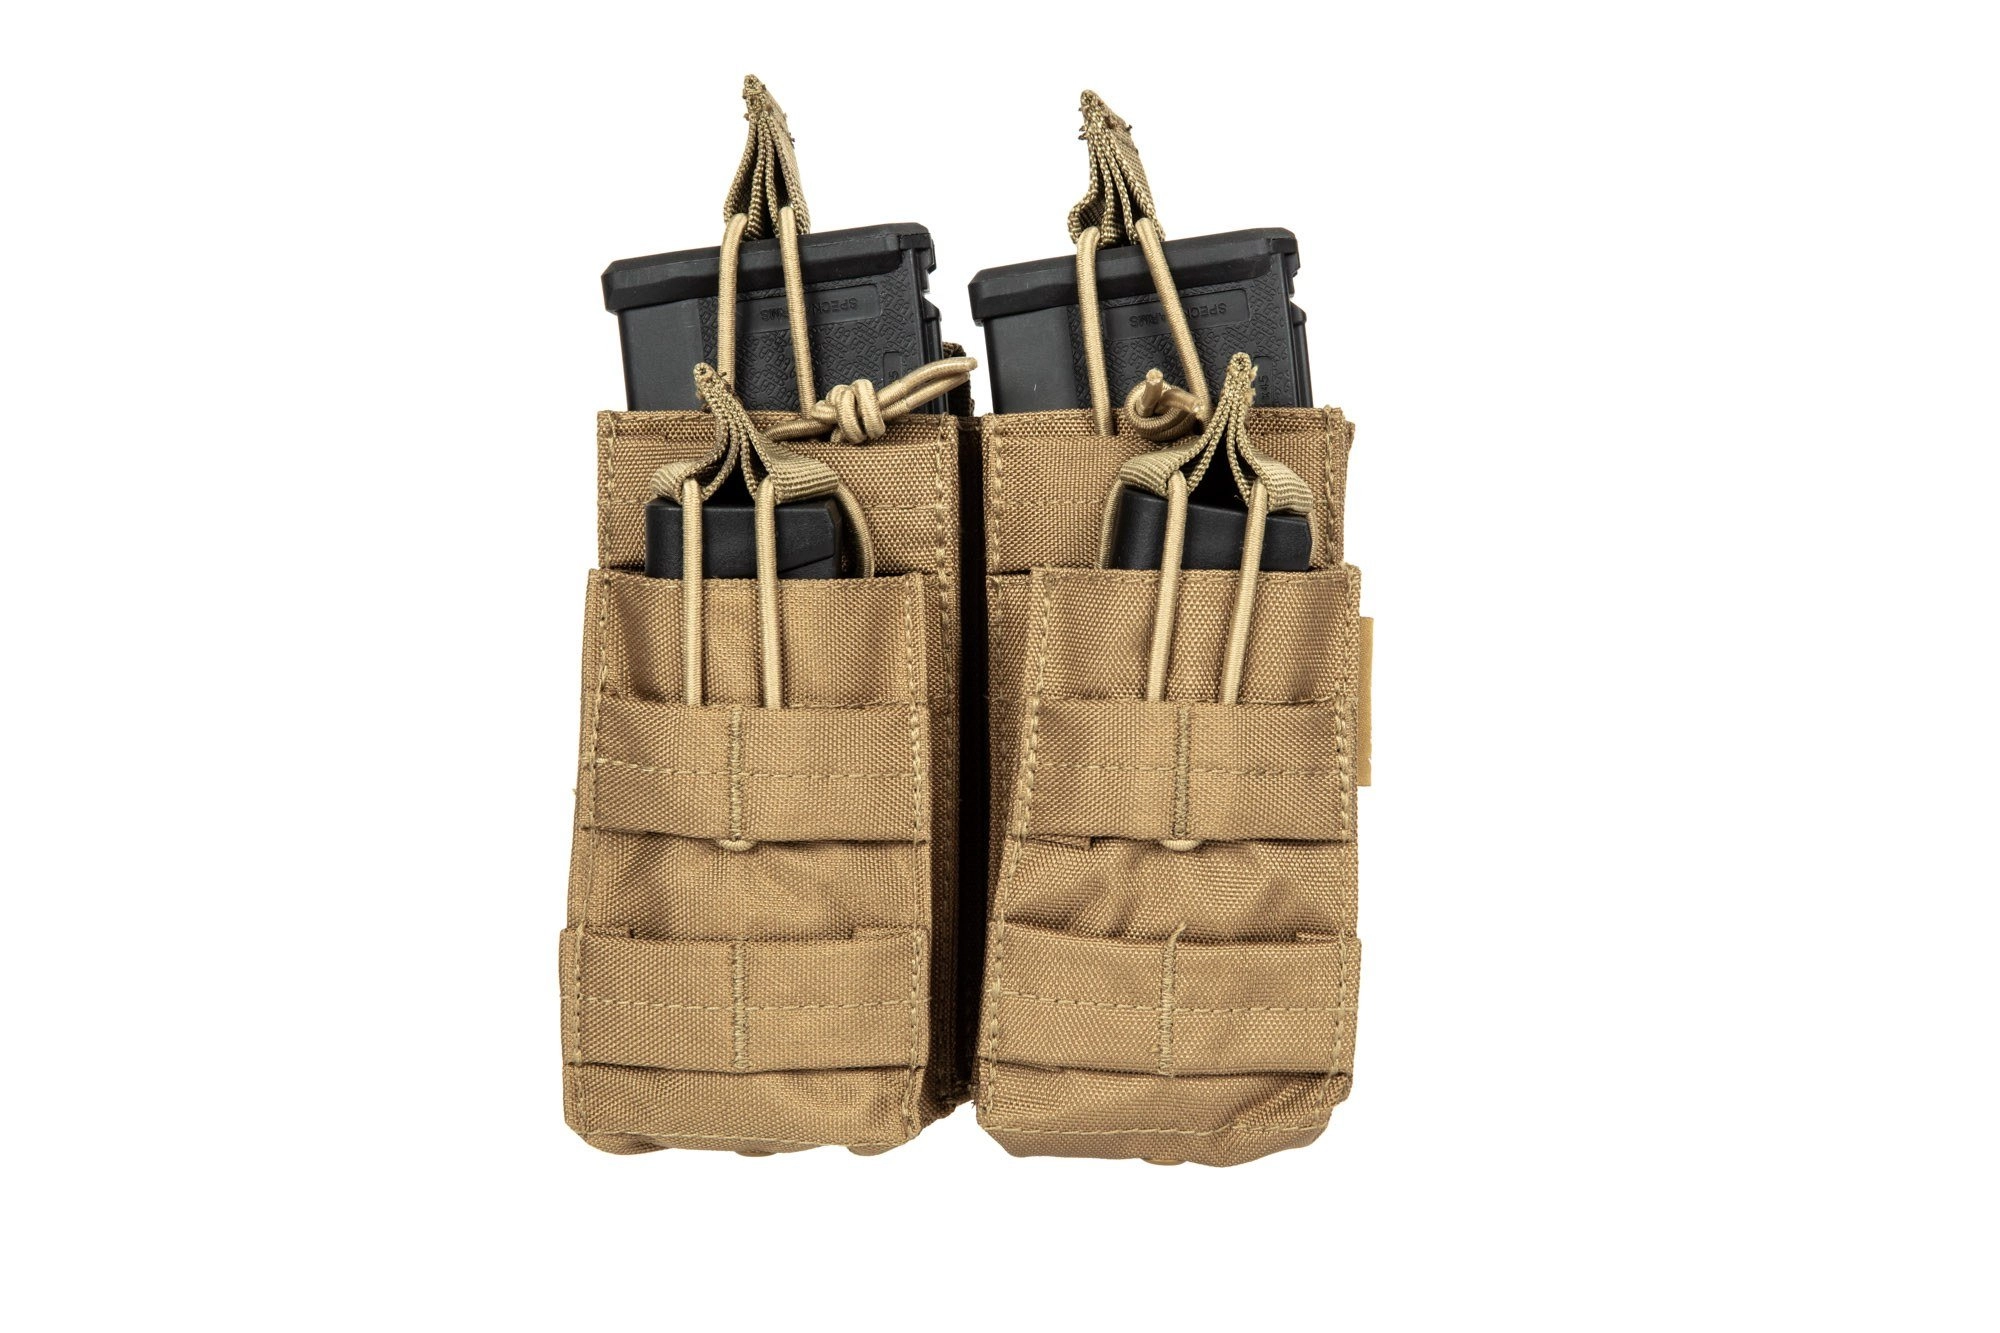 M4/M16 type double magazine pouch - Coyote